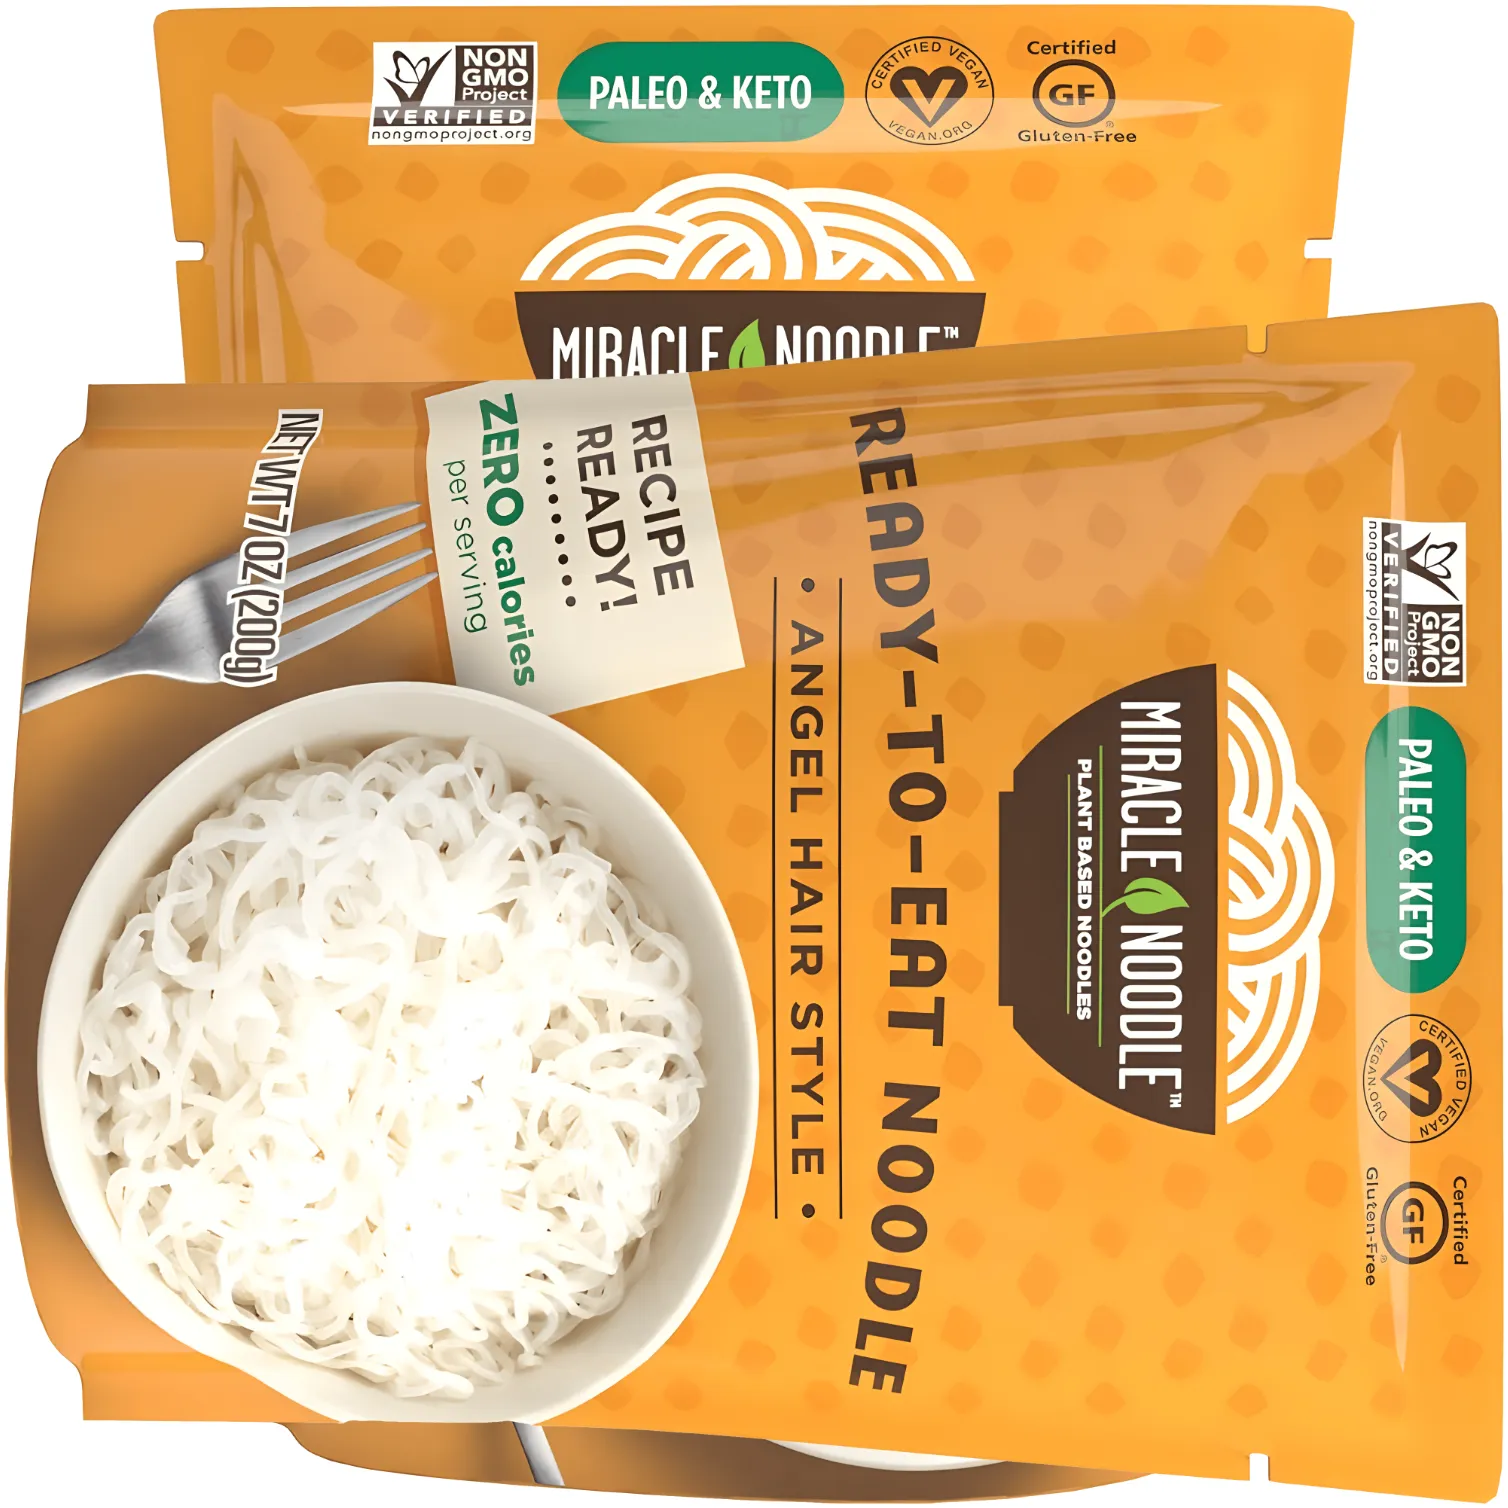 Free Miracle Noodle At Publix After Rebate